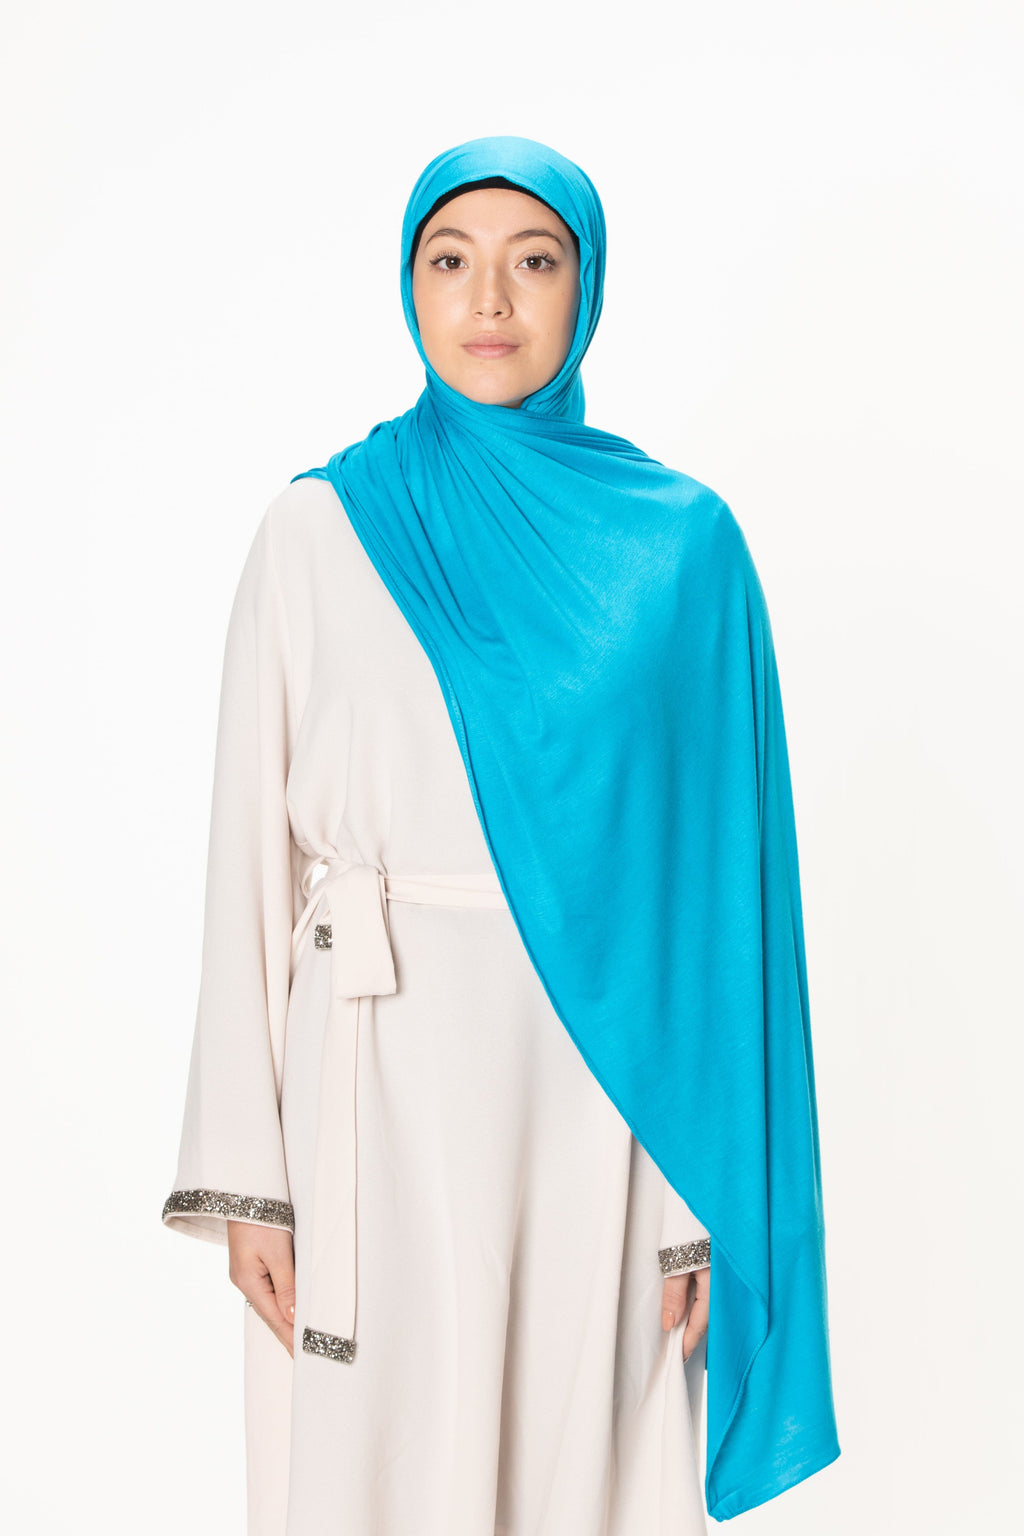 Zeina Soft Stretchy Premium Jersey Hijab - Premium Quality for Comfort and Style 29